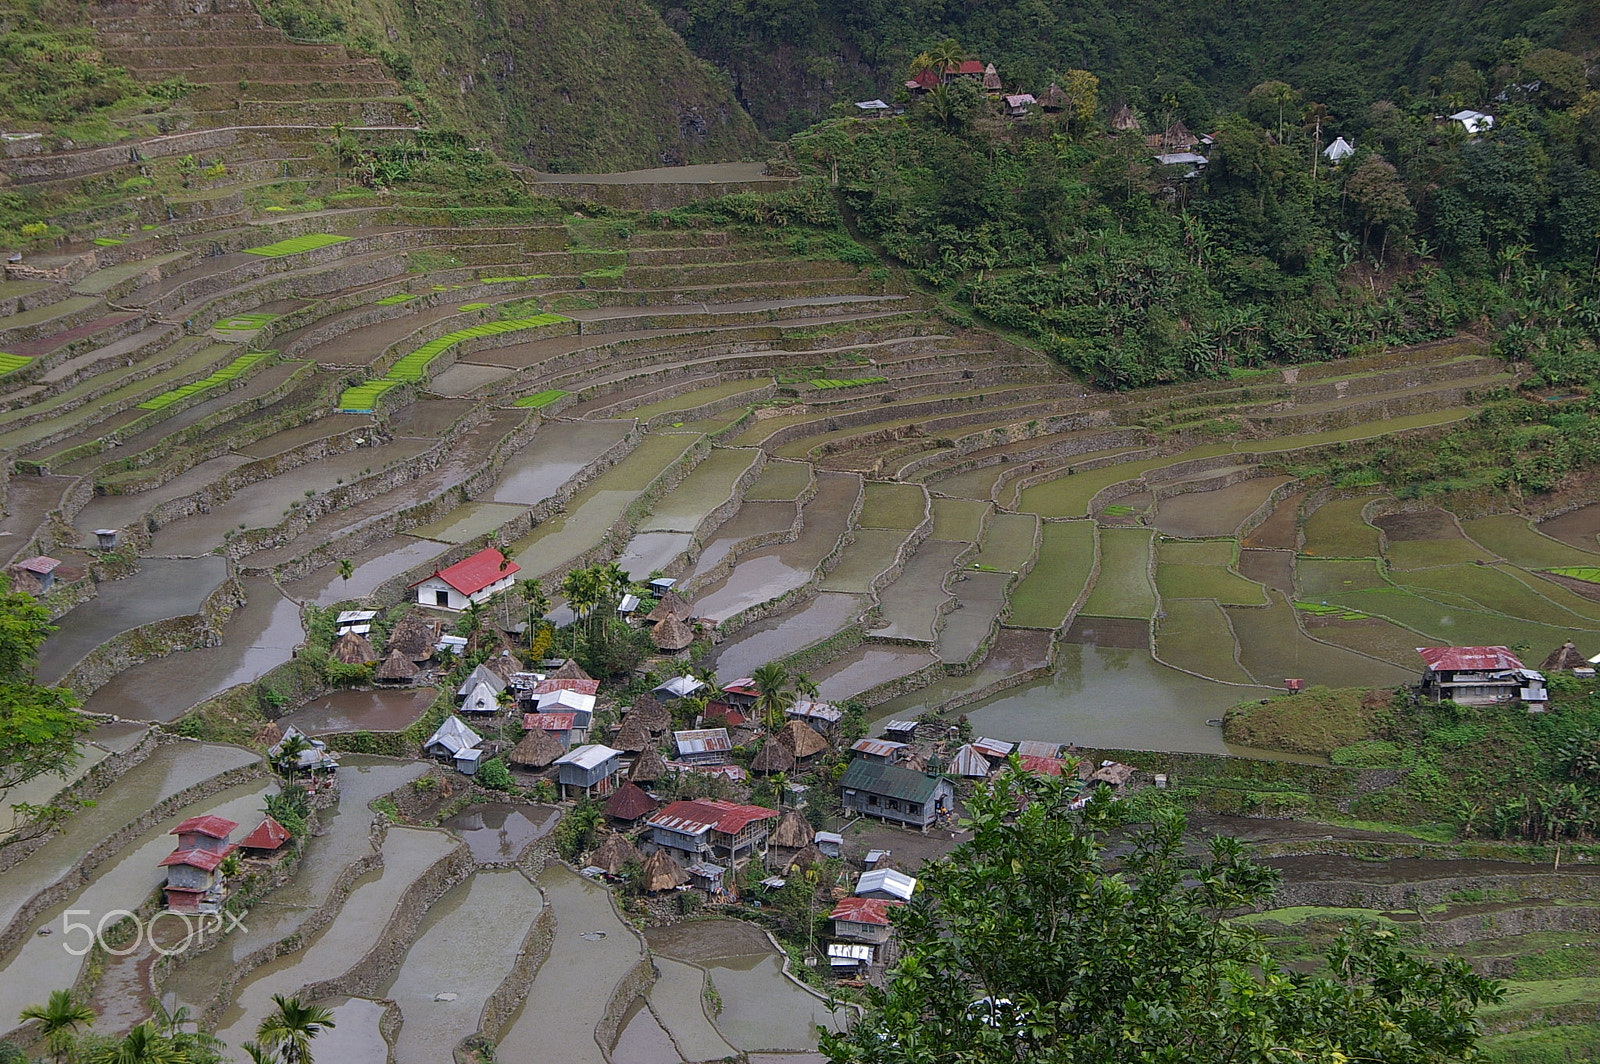 Pentax *ist DS sample photo. Rice terraces of banaue, philippiness photography